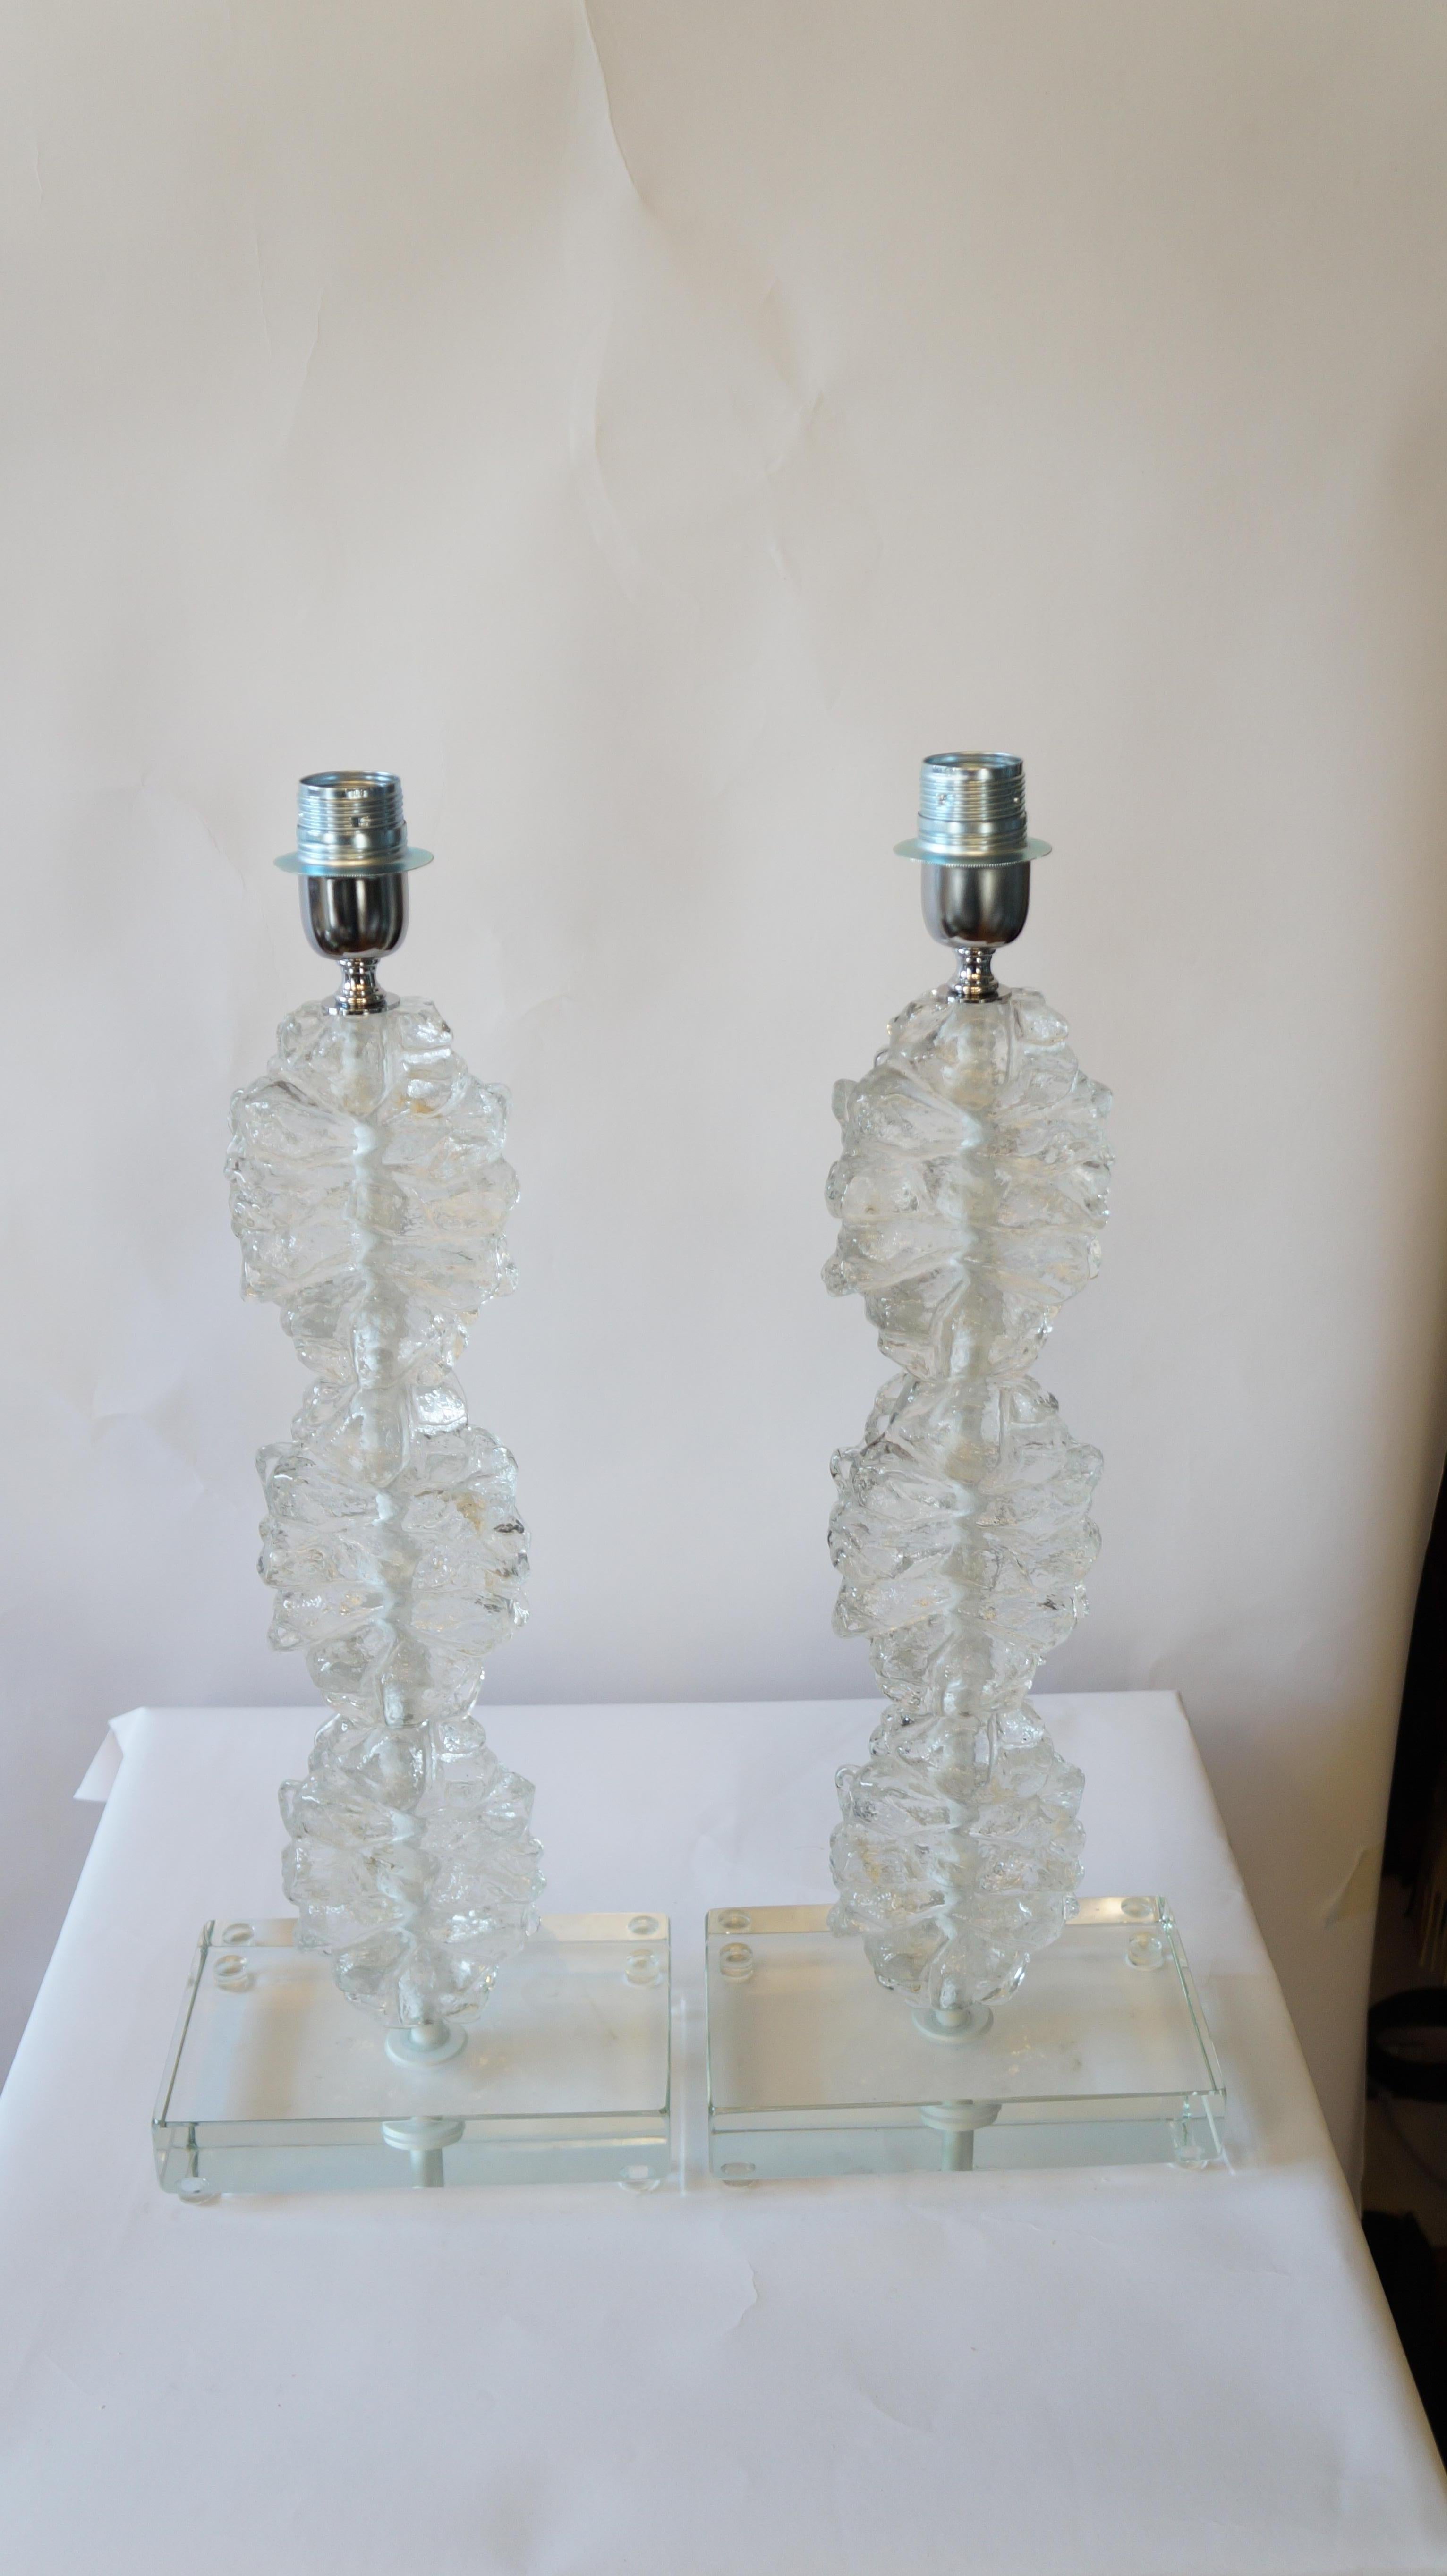 You have in front of you in the image you can see, two lamps made by Toso Murano in 1978. 
These lamps are very simple and characterized by the superimposition of this kind of glass with a glacial touch. 
But they are not as cold as ice, since,